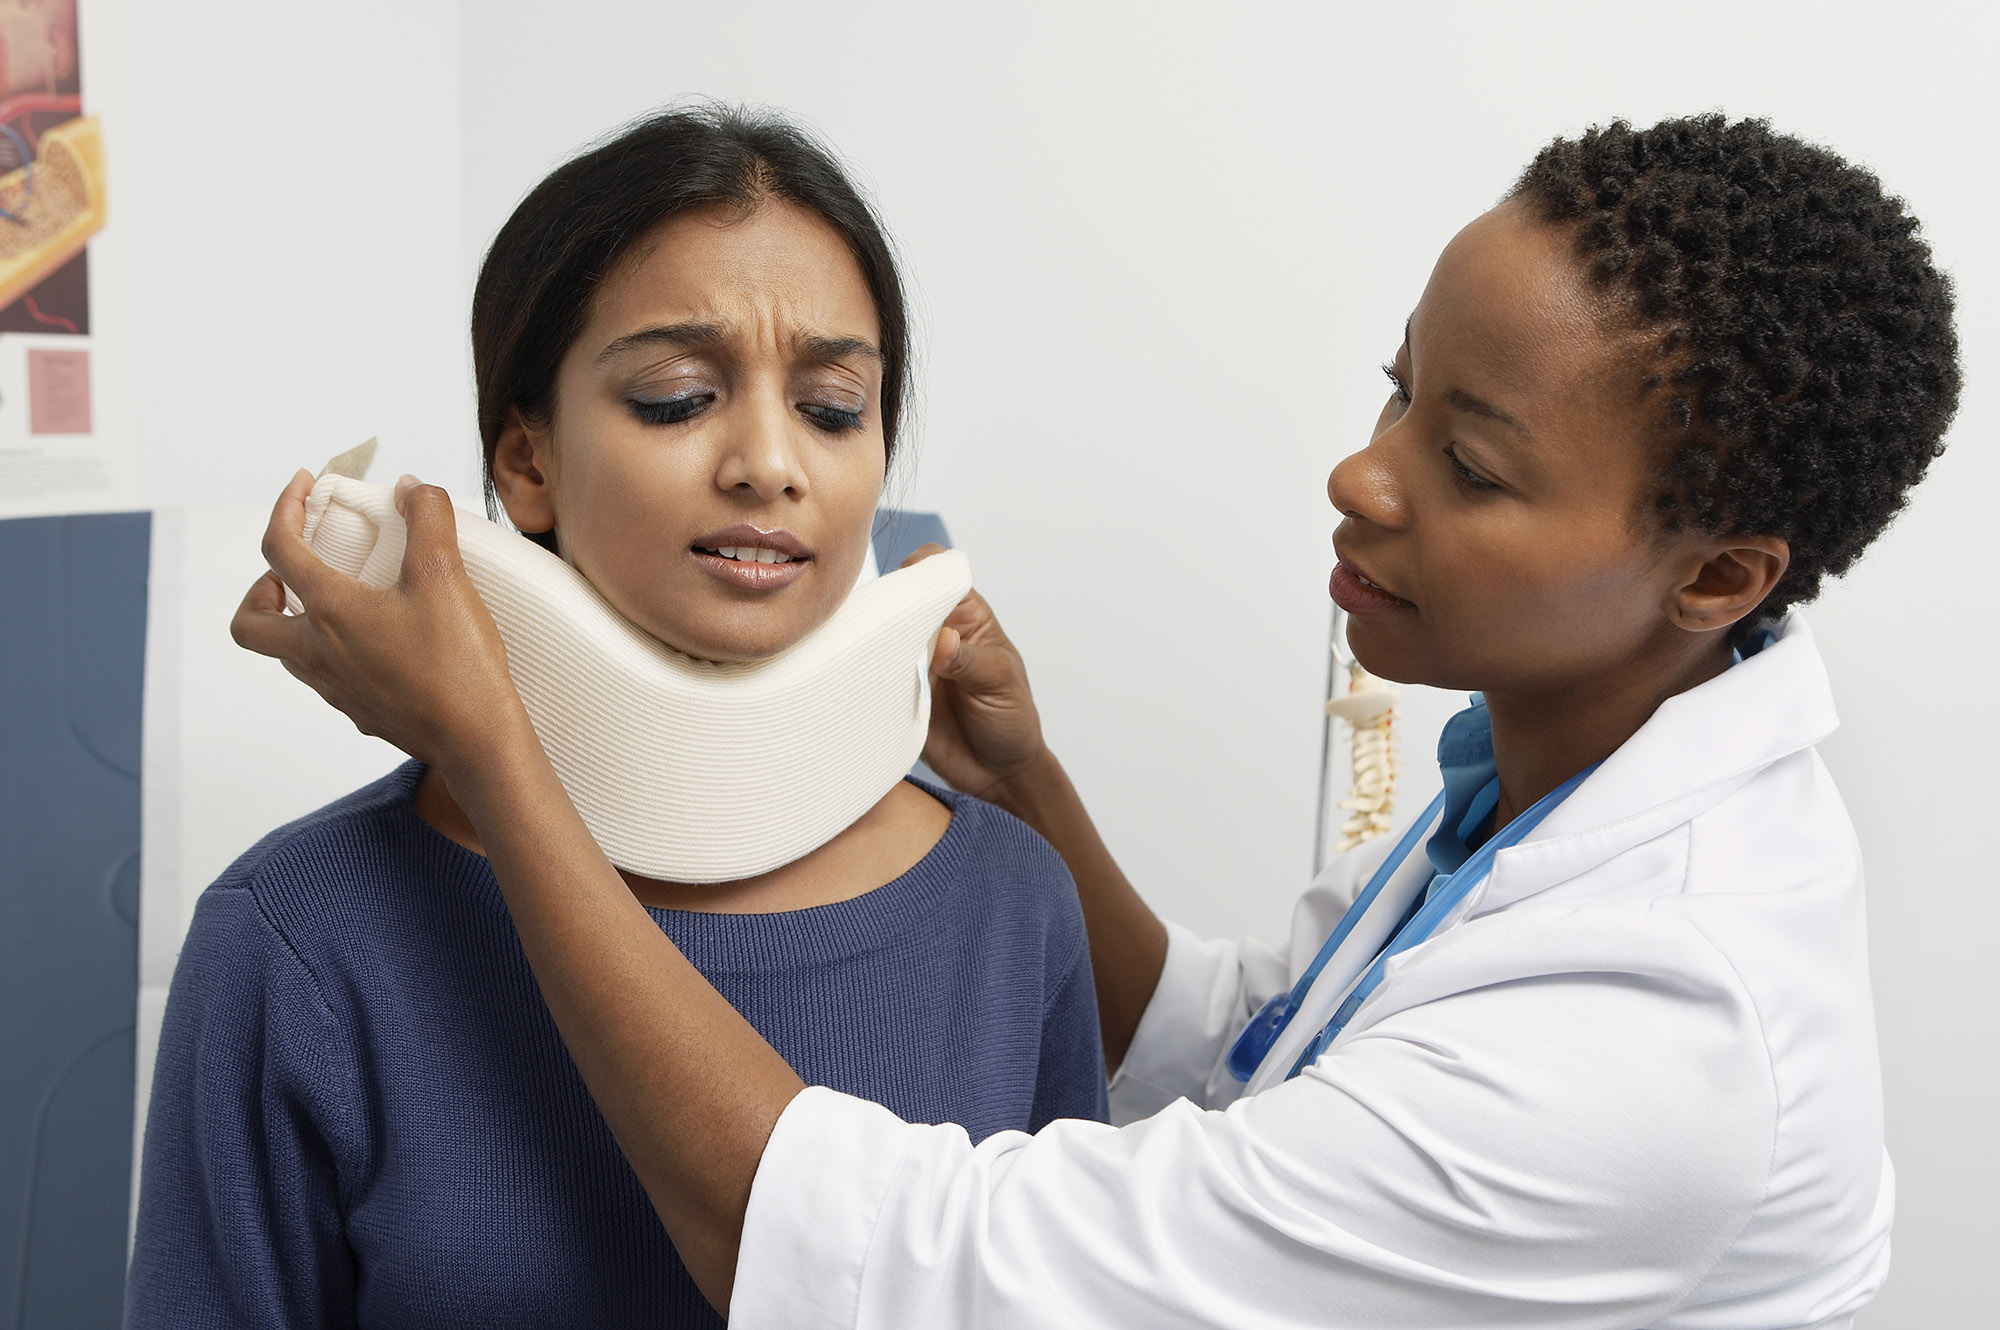 neck injury medical negligence compensation claims Wakefield